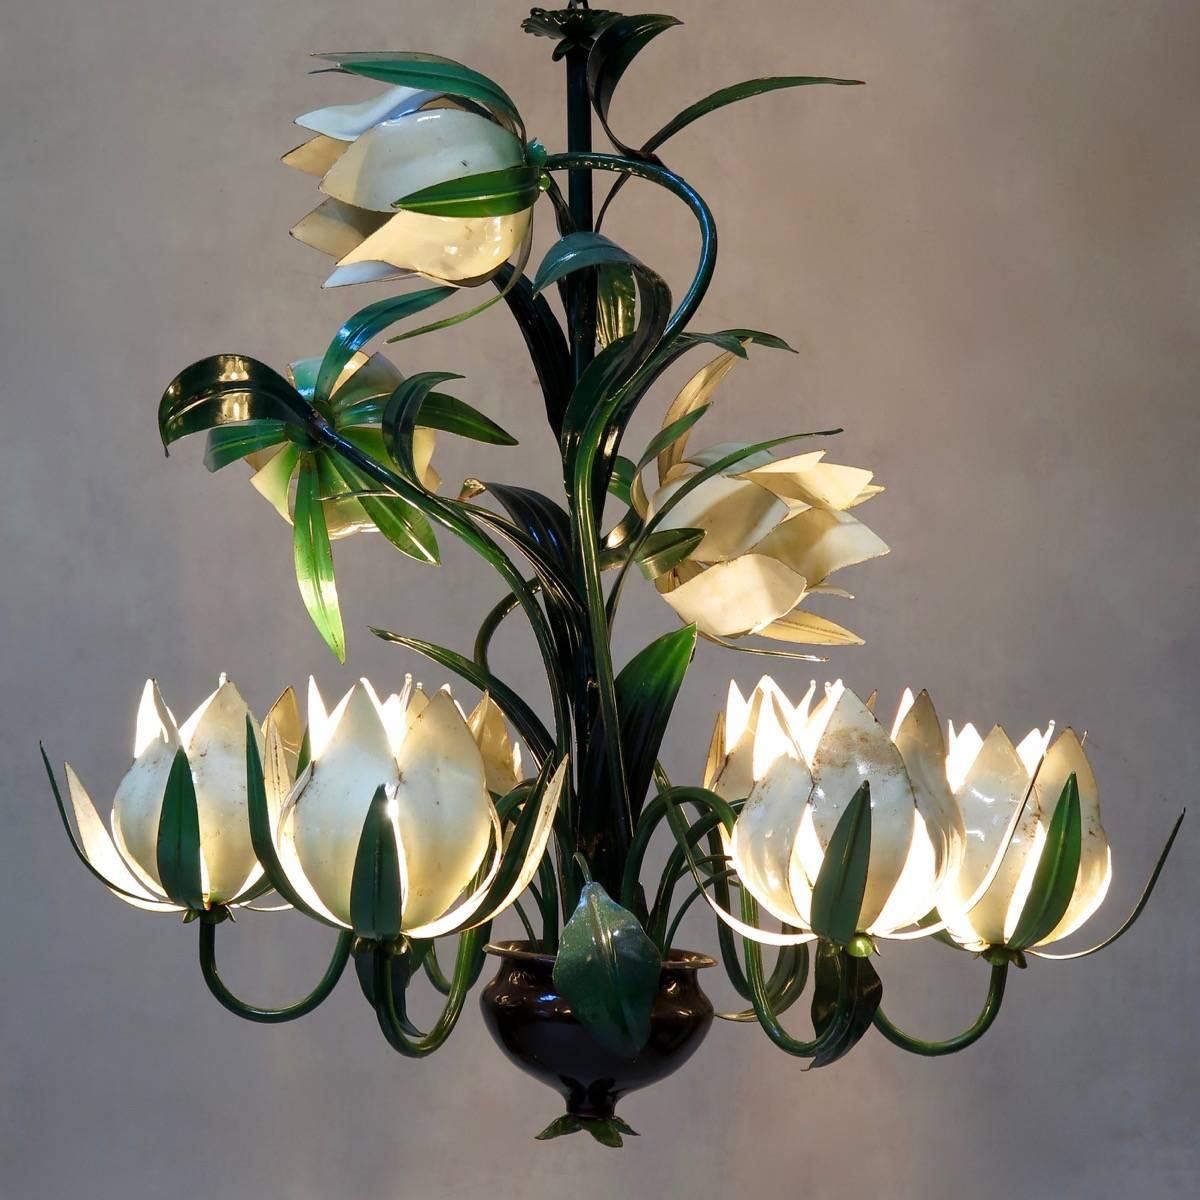 Charming midcentury painted tôle chandelier with large flowers and luxuriant-looking foliage. The six lower flowerheads light up; the three above are decorative.